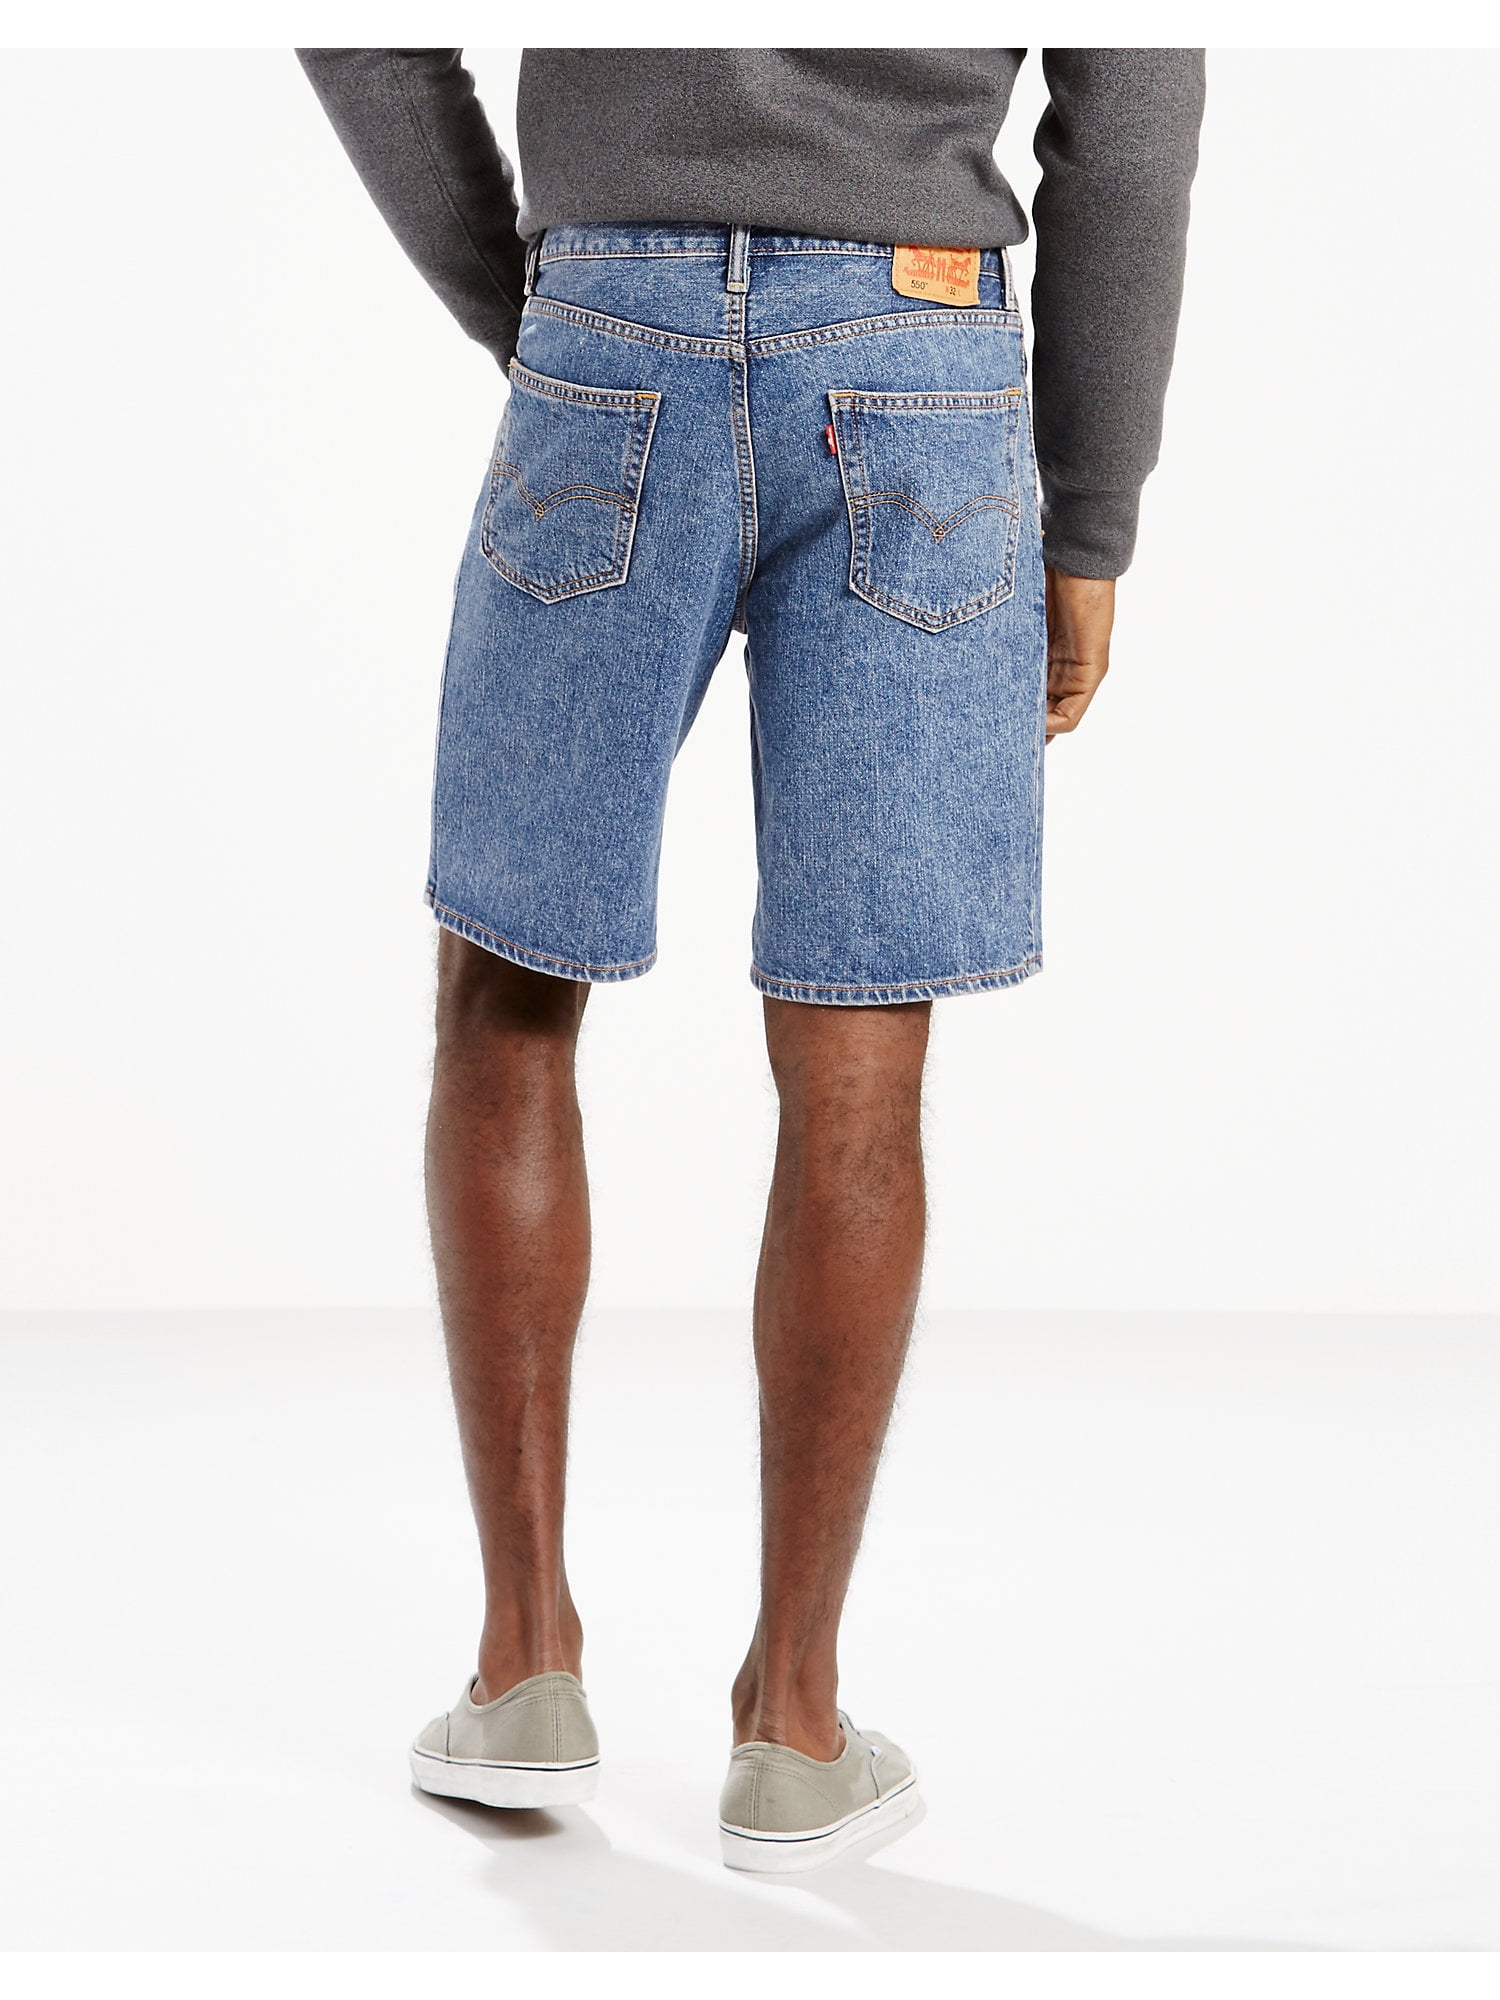 levi's 550 relaxed fit mens jean shorts